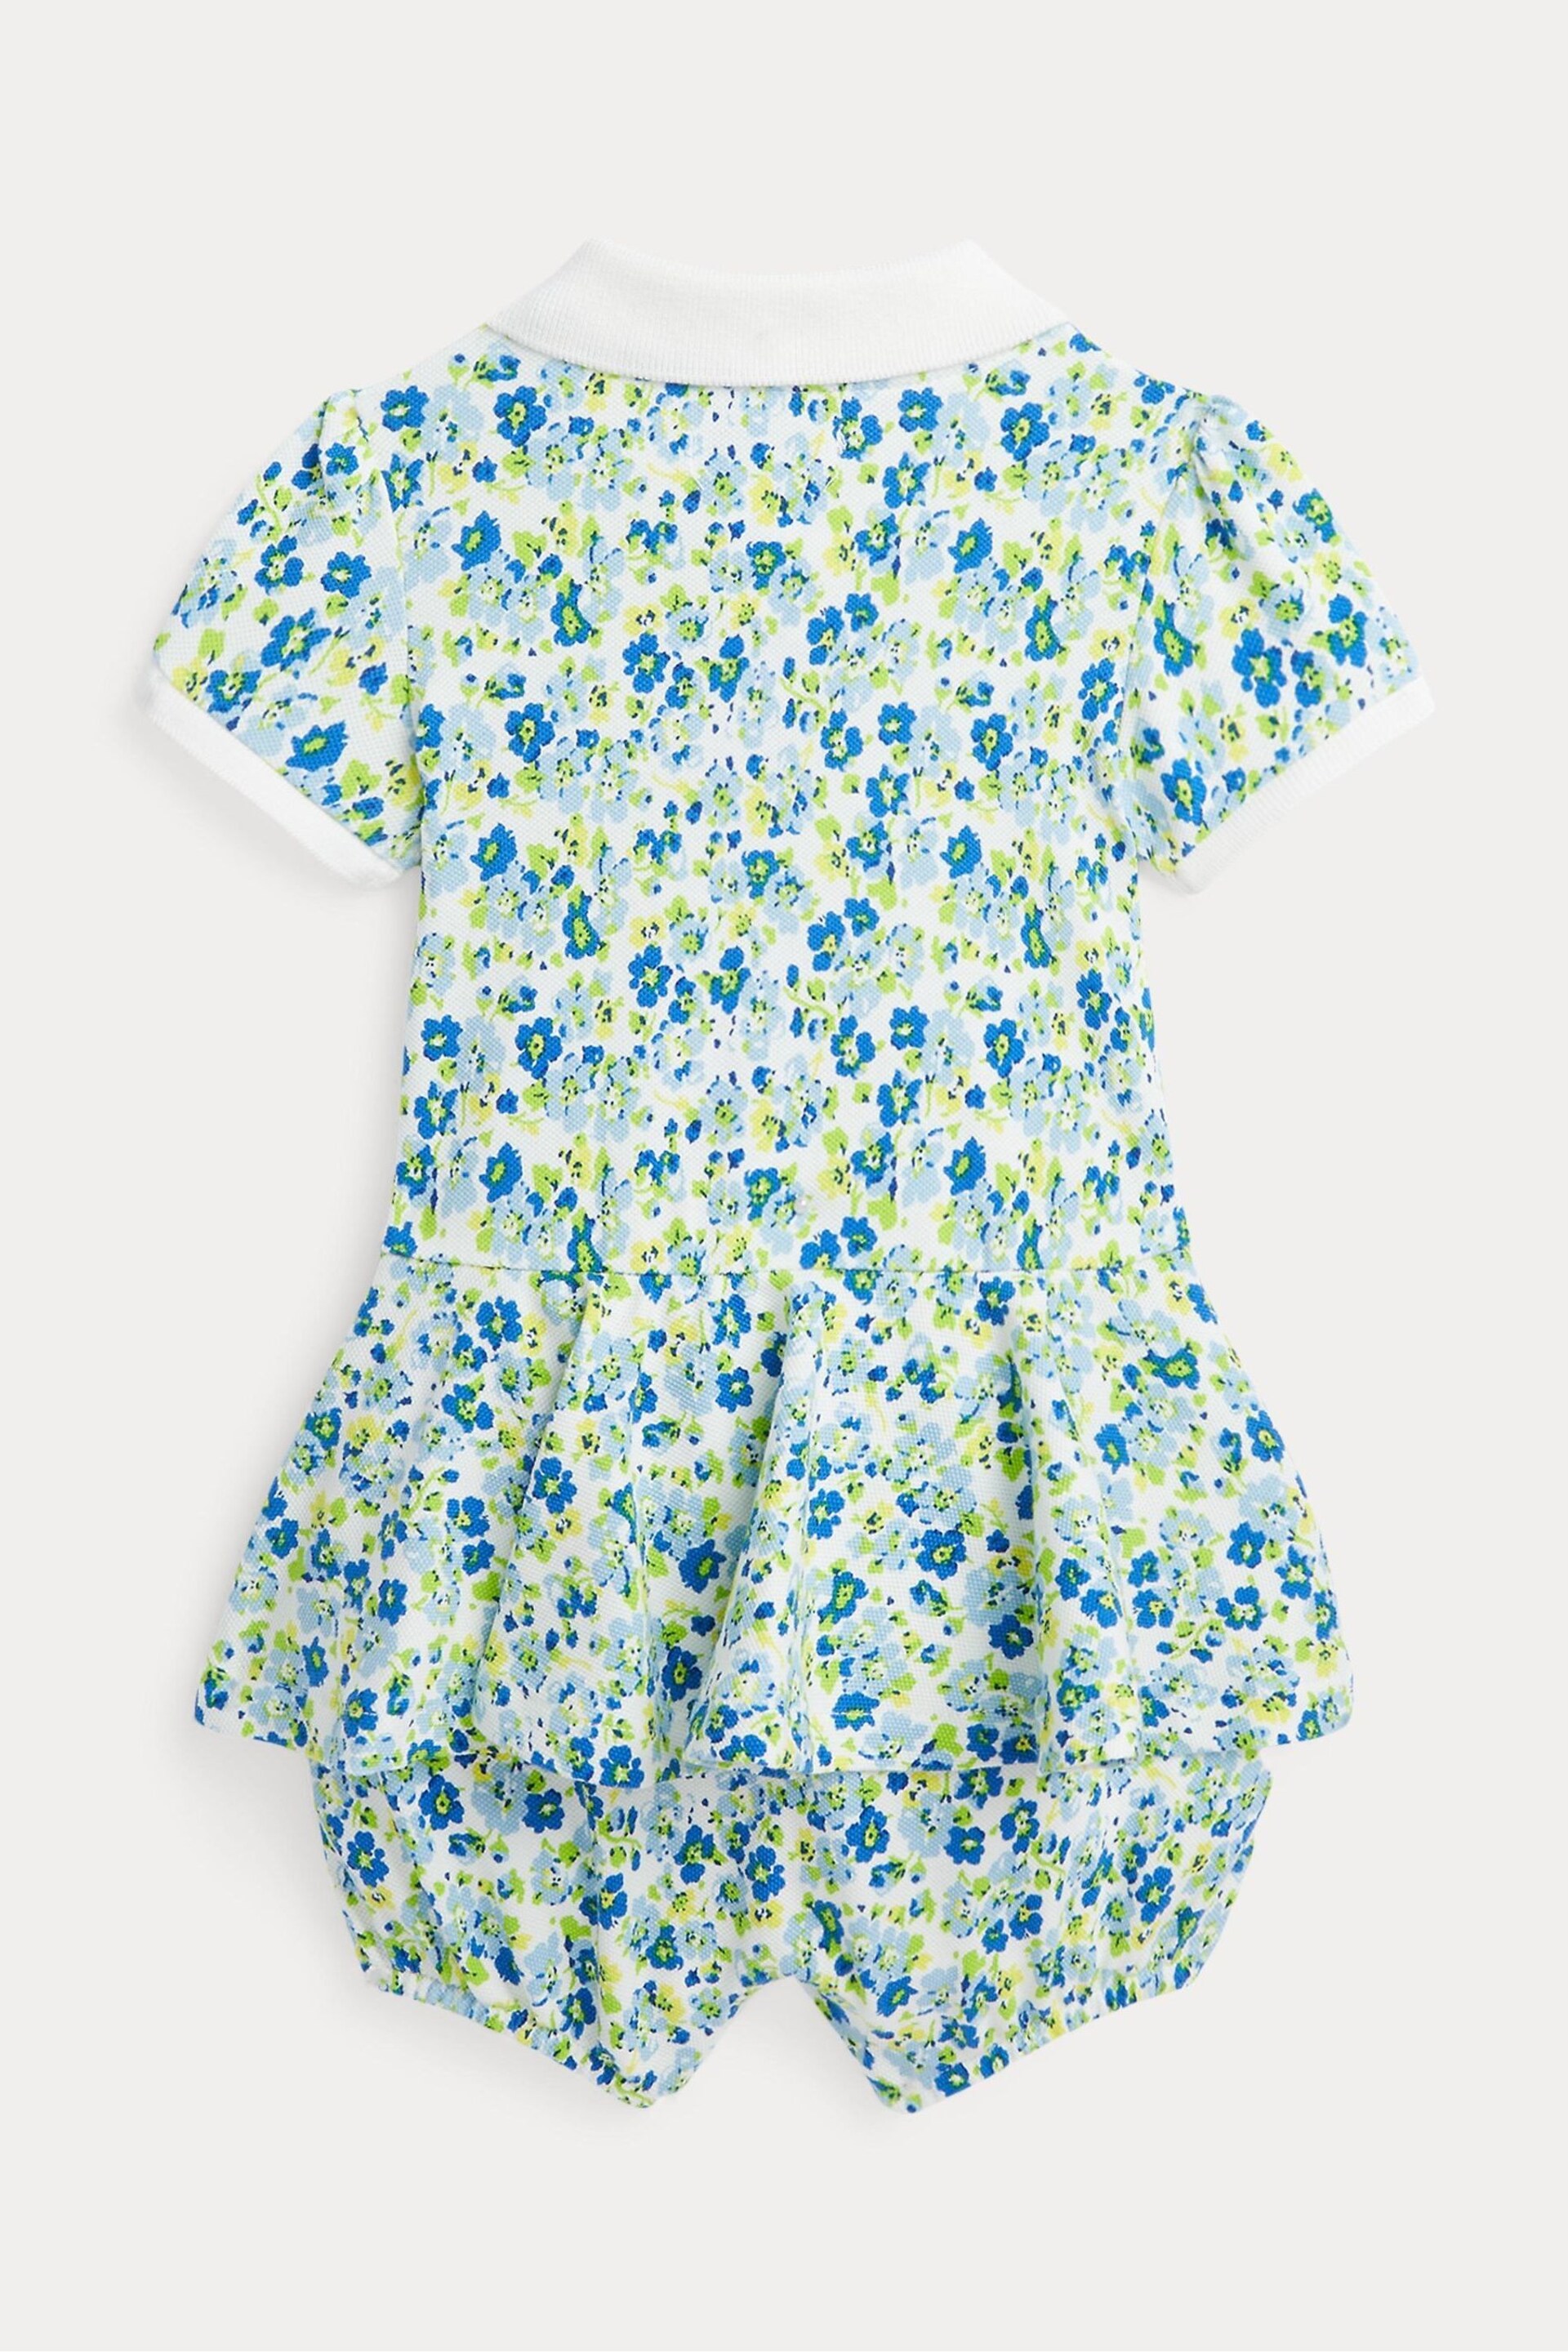 Polo Ralph Lauren Baby Floral Romper - Image 2 of 4